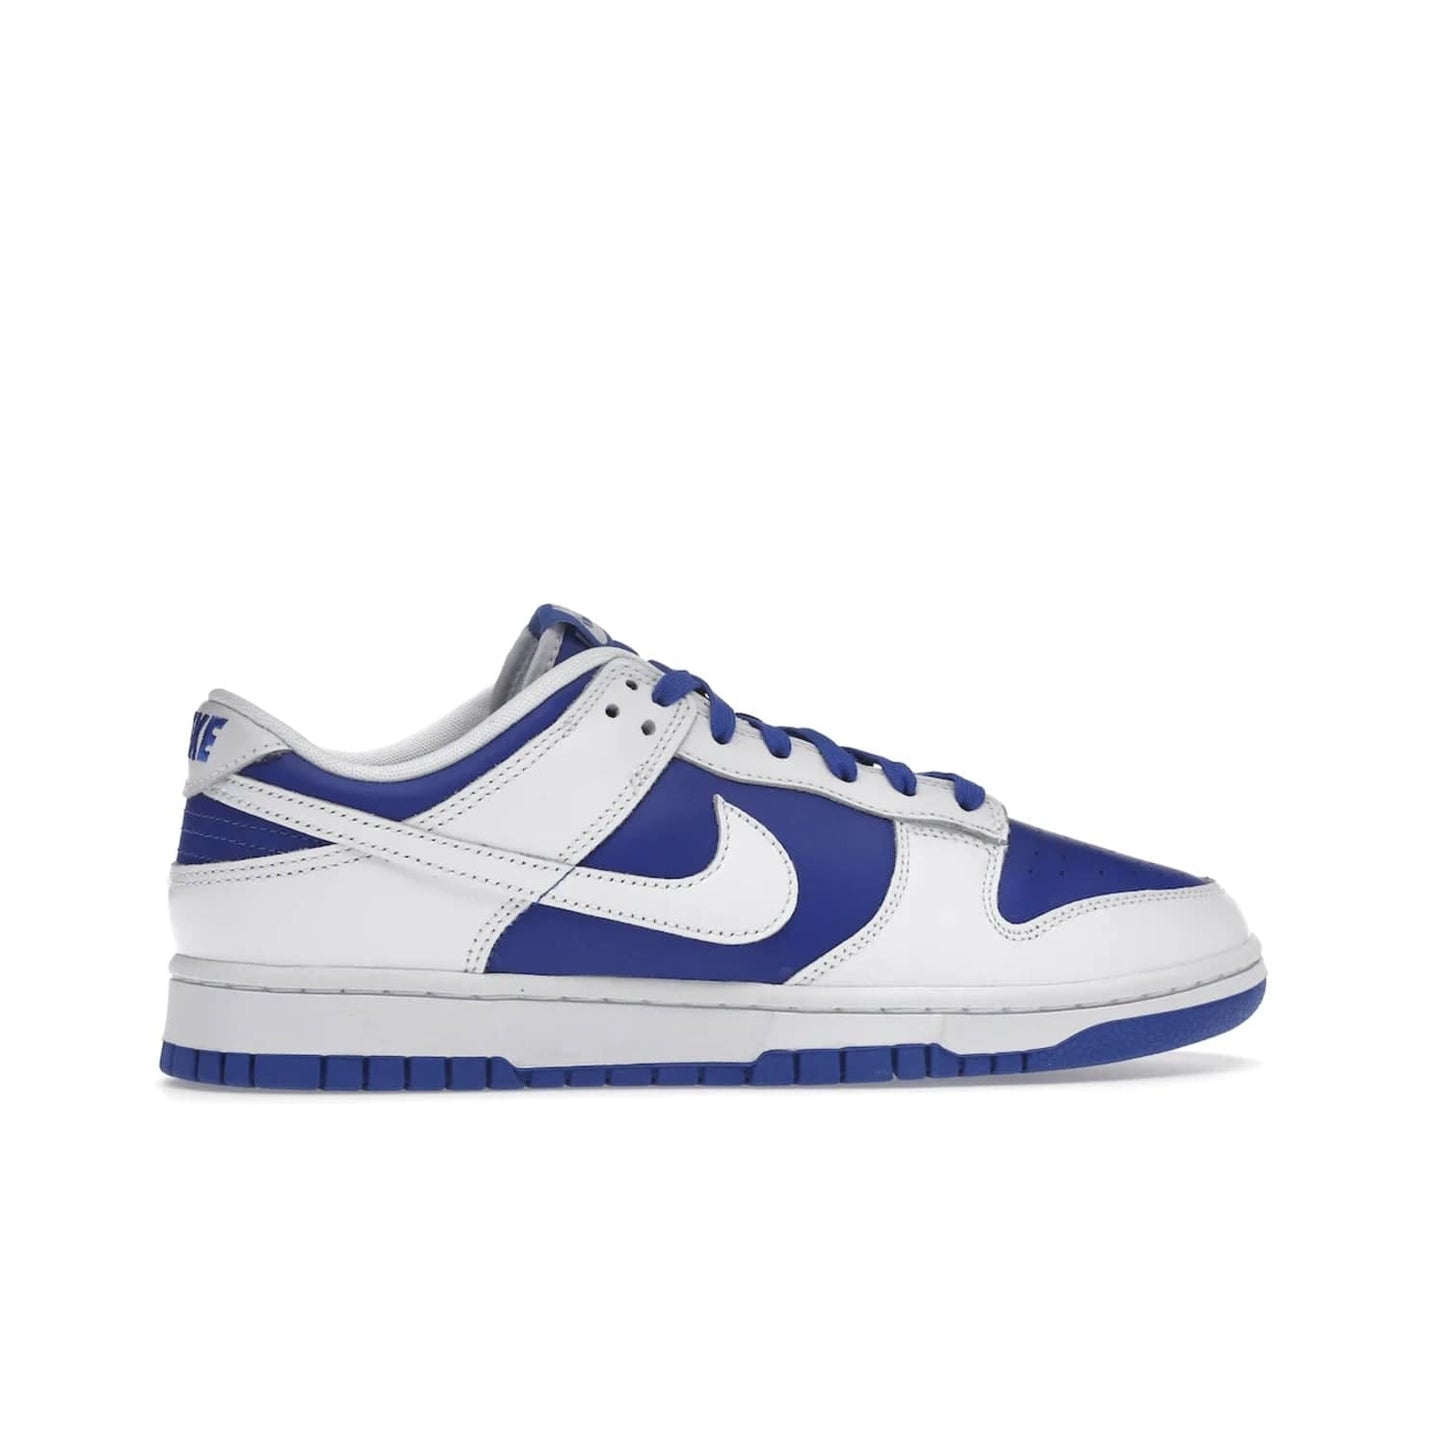 Nike Dunk Low Racer Blue White - Image 36 - Only at www.BallersClubKickz.com - Sleek Racer Blue leather upper and white leather overlays make up the Nike Dunk Low Racer Blue White. Woven tag and heel embroidery for a 1985 Dunk look with a matching EVA foam sole completes the classic colorway.